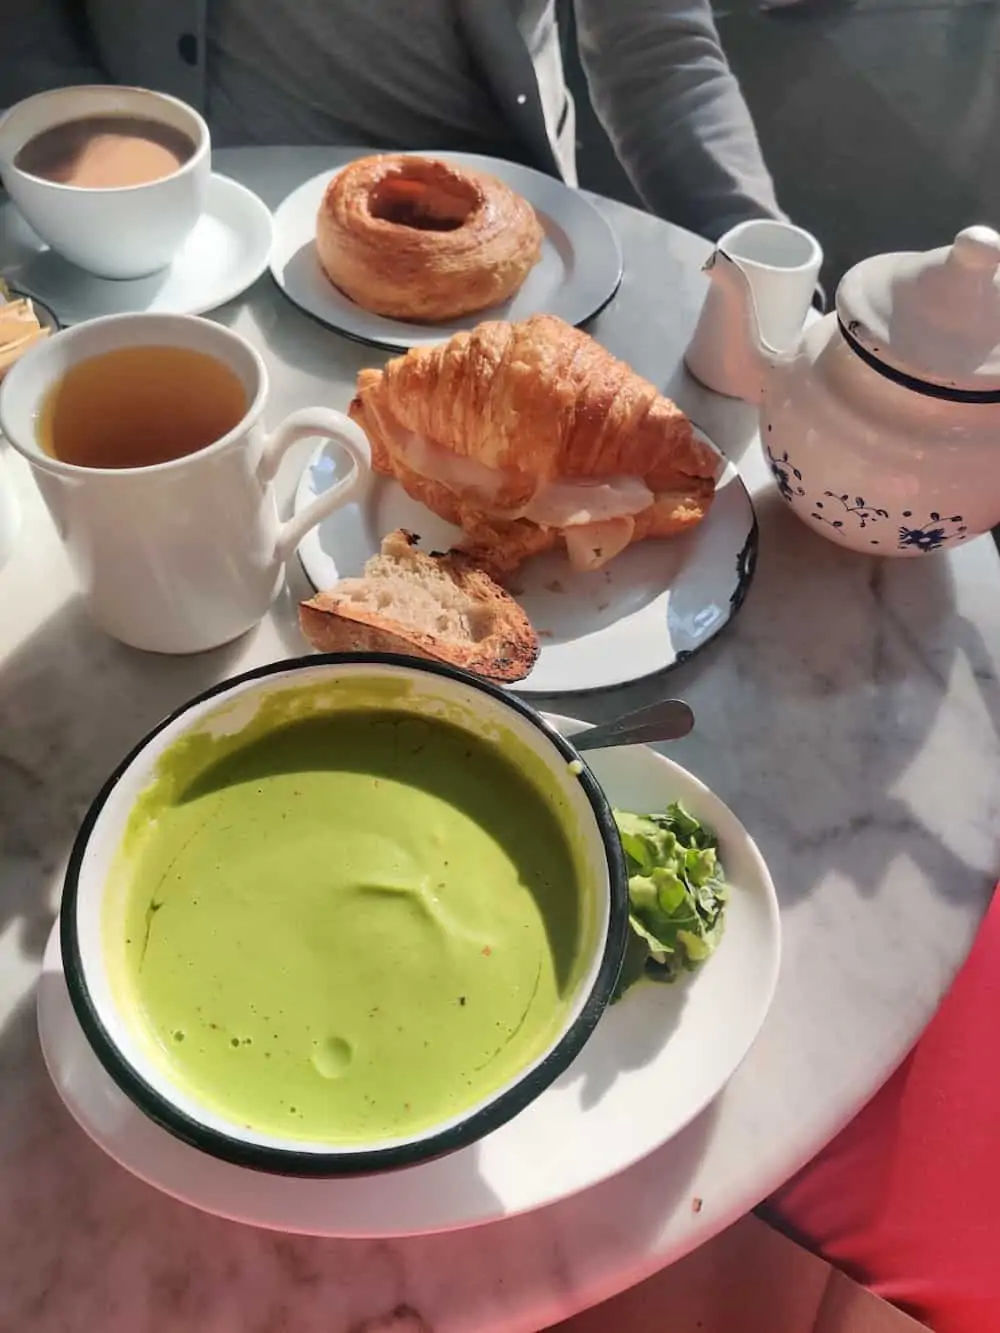 A bowl of pea soup at Panaderia Rosetta in Mexico City.